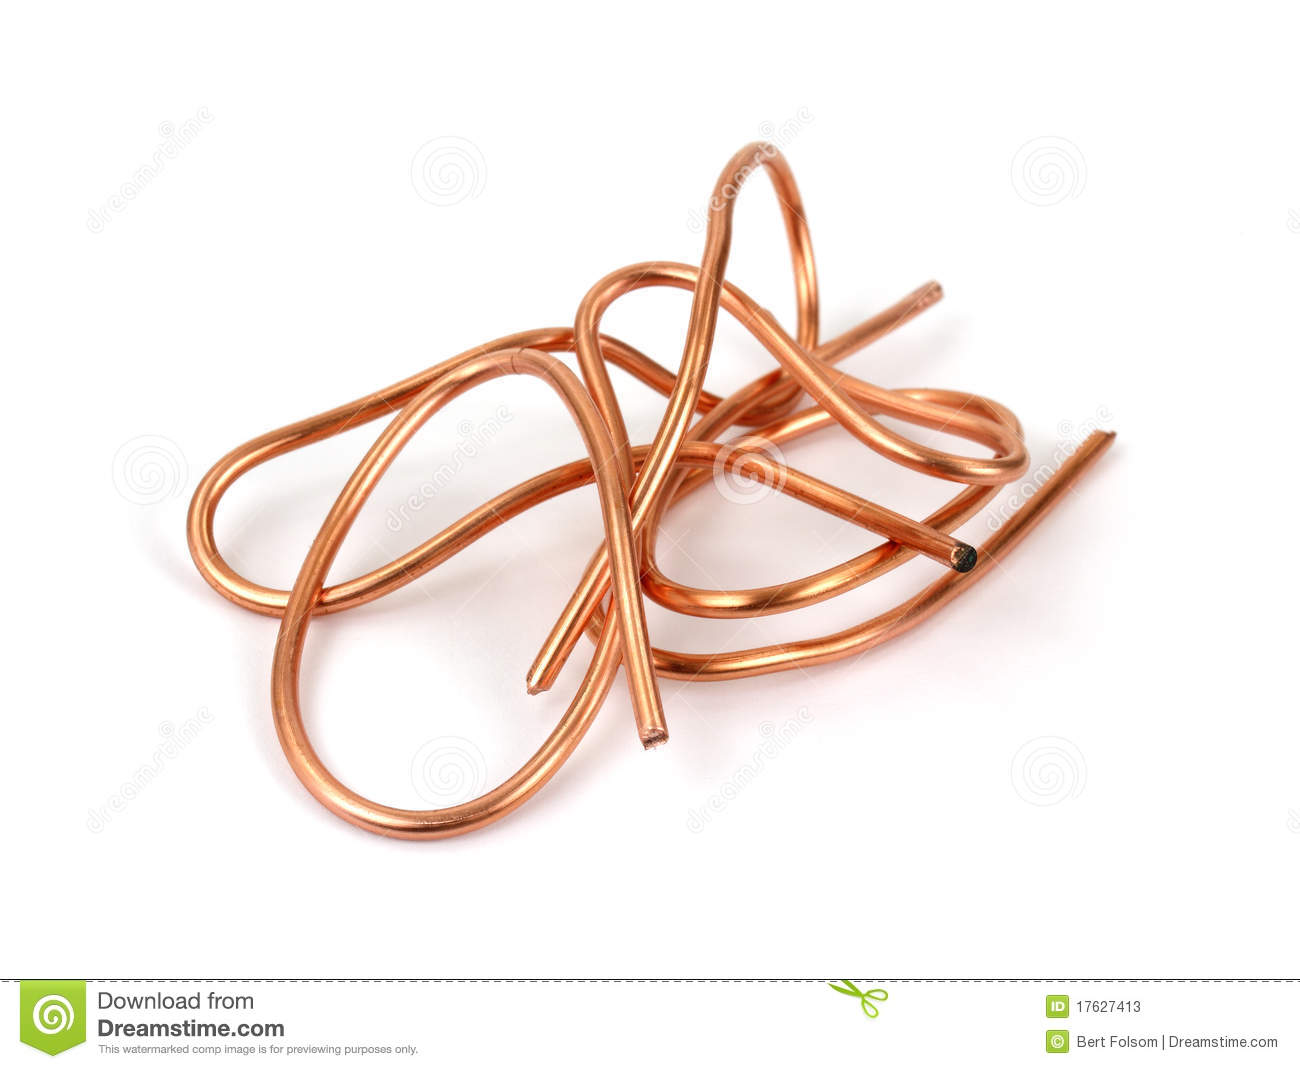 Copper Wire For Recycling On A White Background 